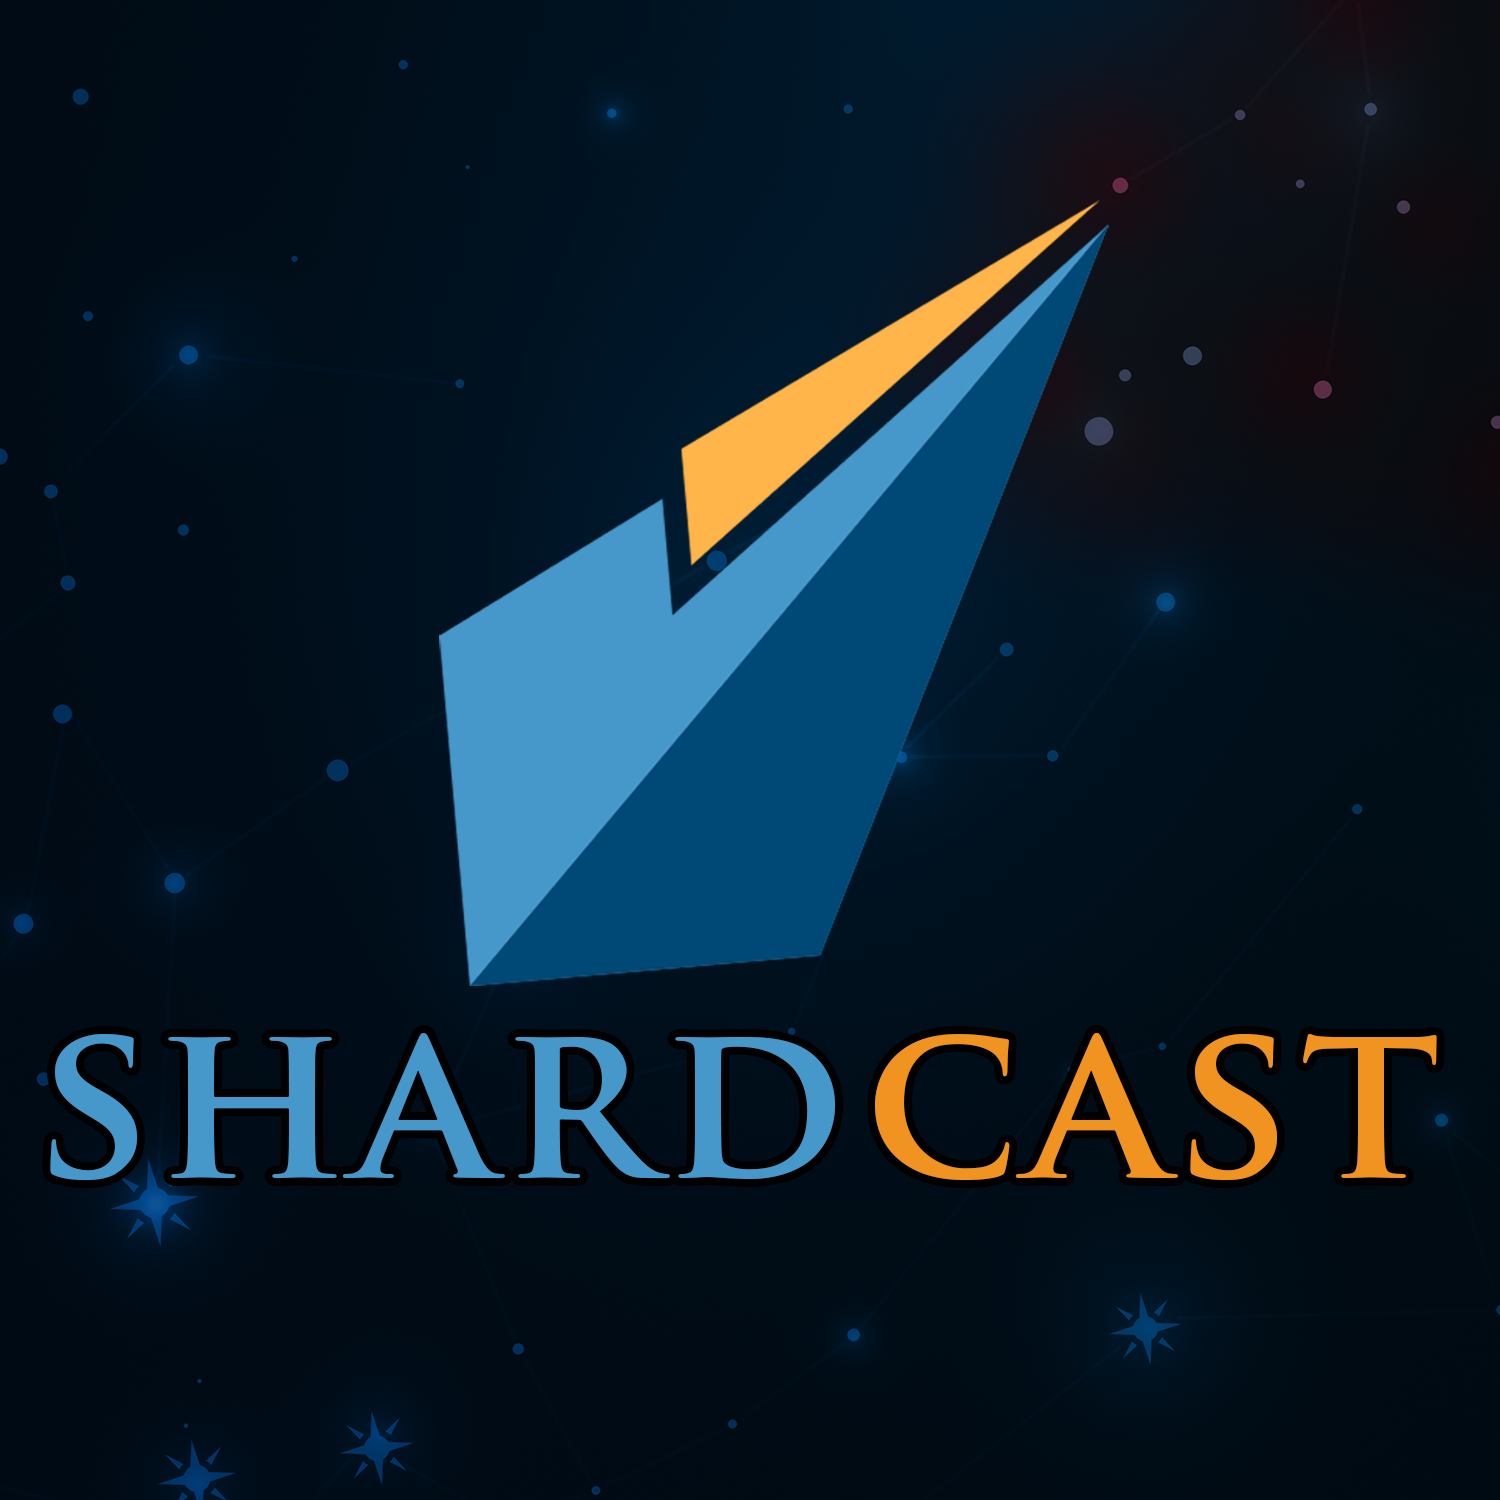 More information about "Shardcast: Moonlight's Mentor"